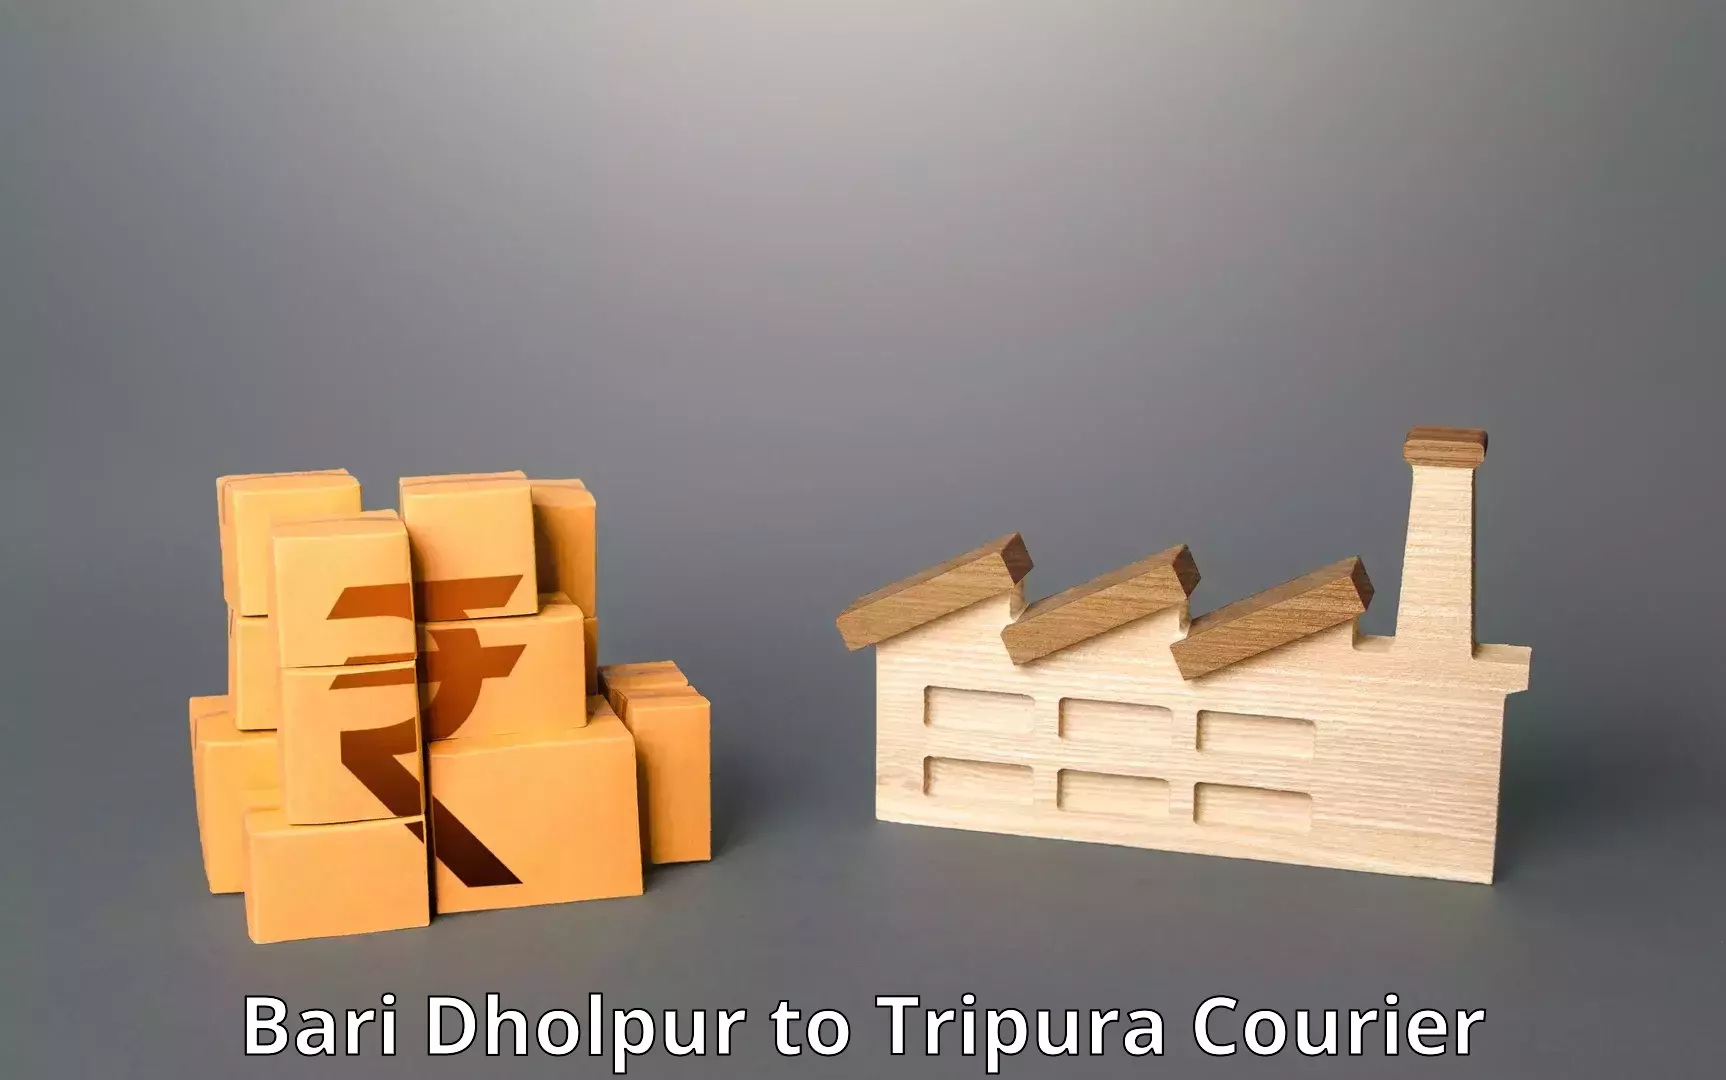 Same-day delivery solutions Bari Dholpur to Tripura